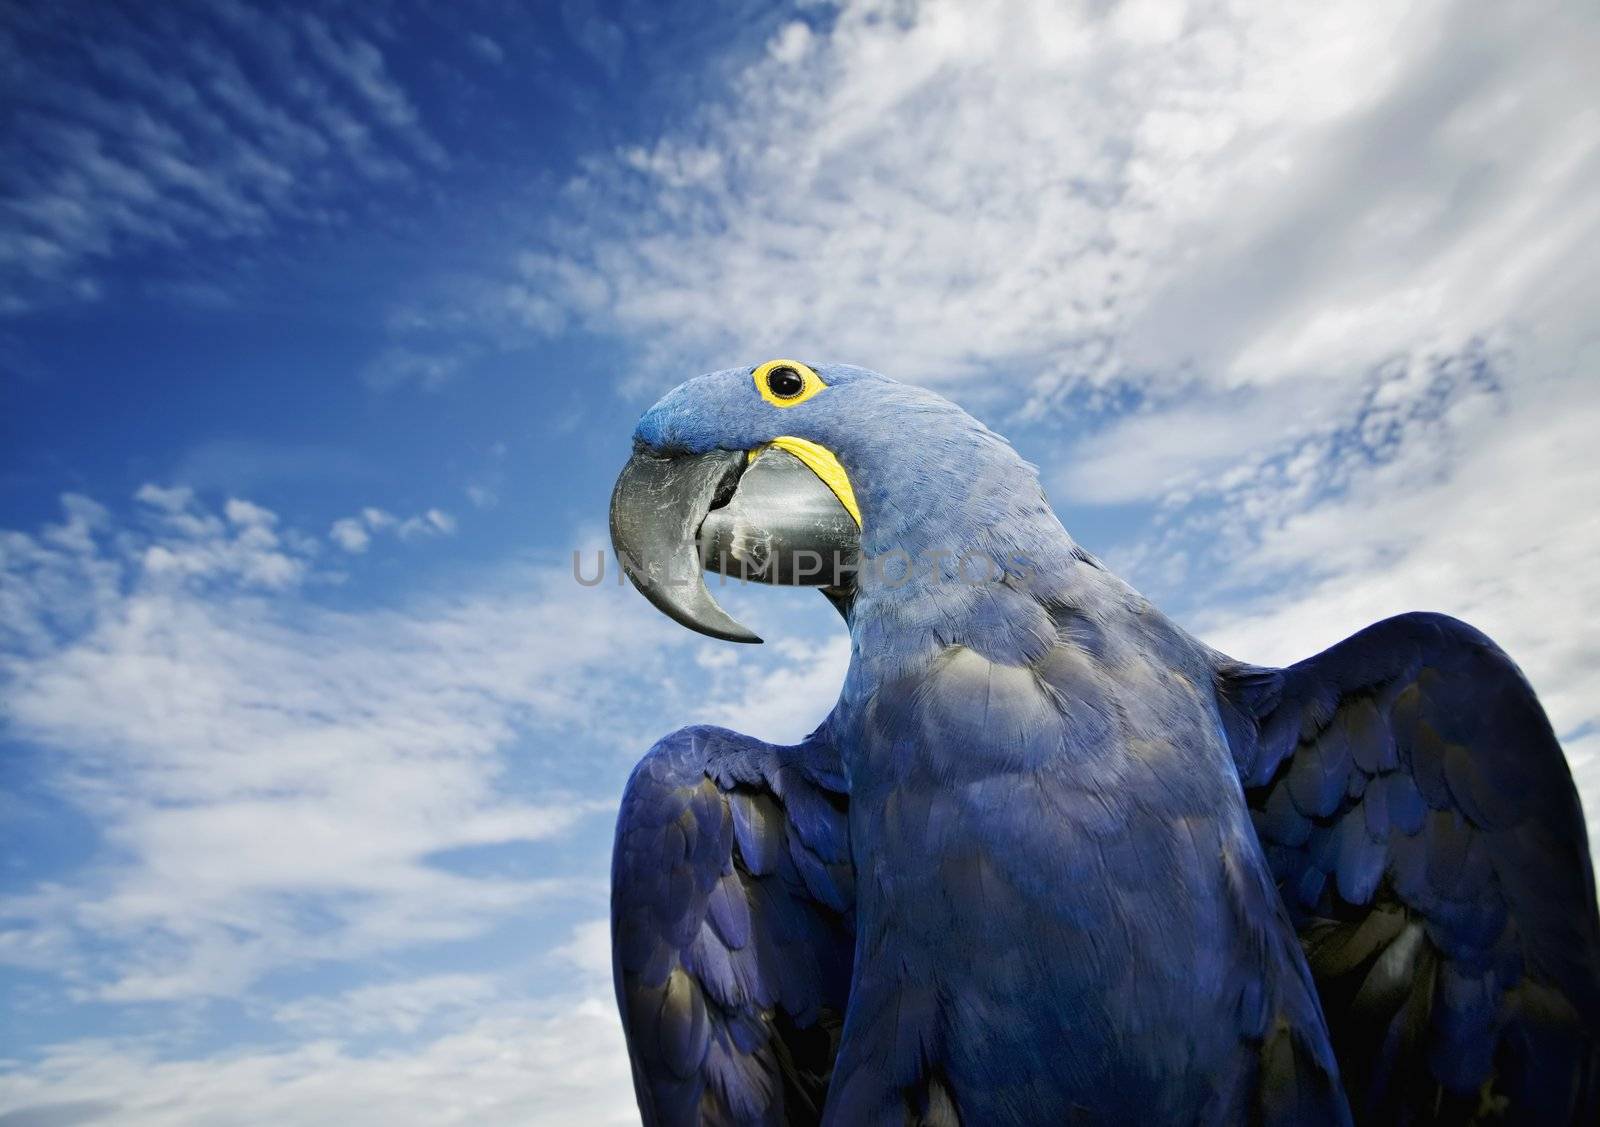 Brilliant blue hyacinth macaw with a yellow ring around its eye.